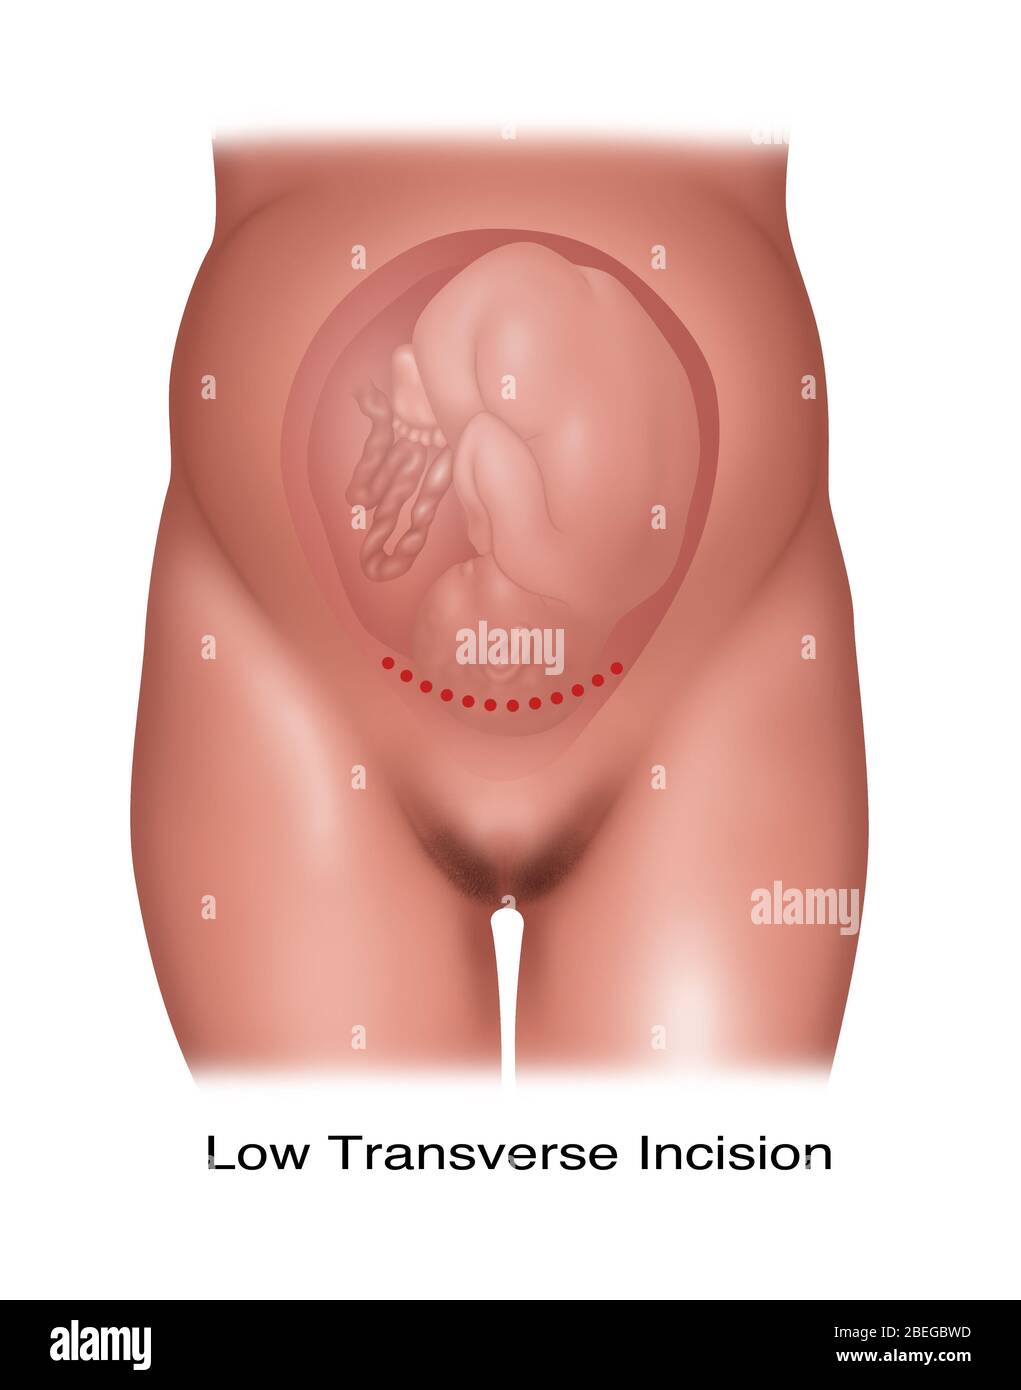 Illustration of a low transverse cesarian incision used to deliver a normal positioned fetus. Stock Photo